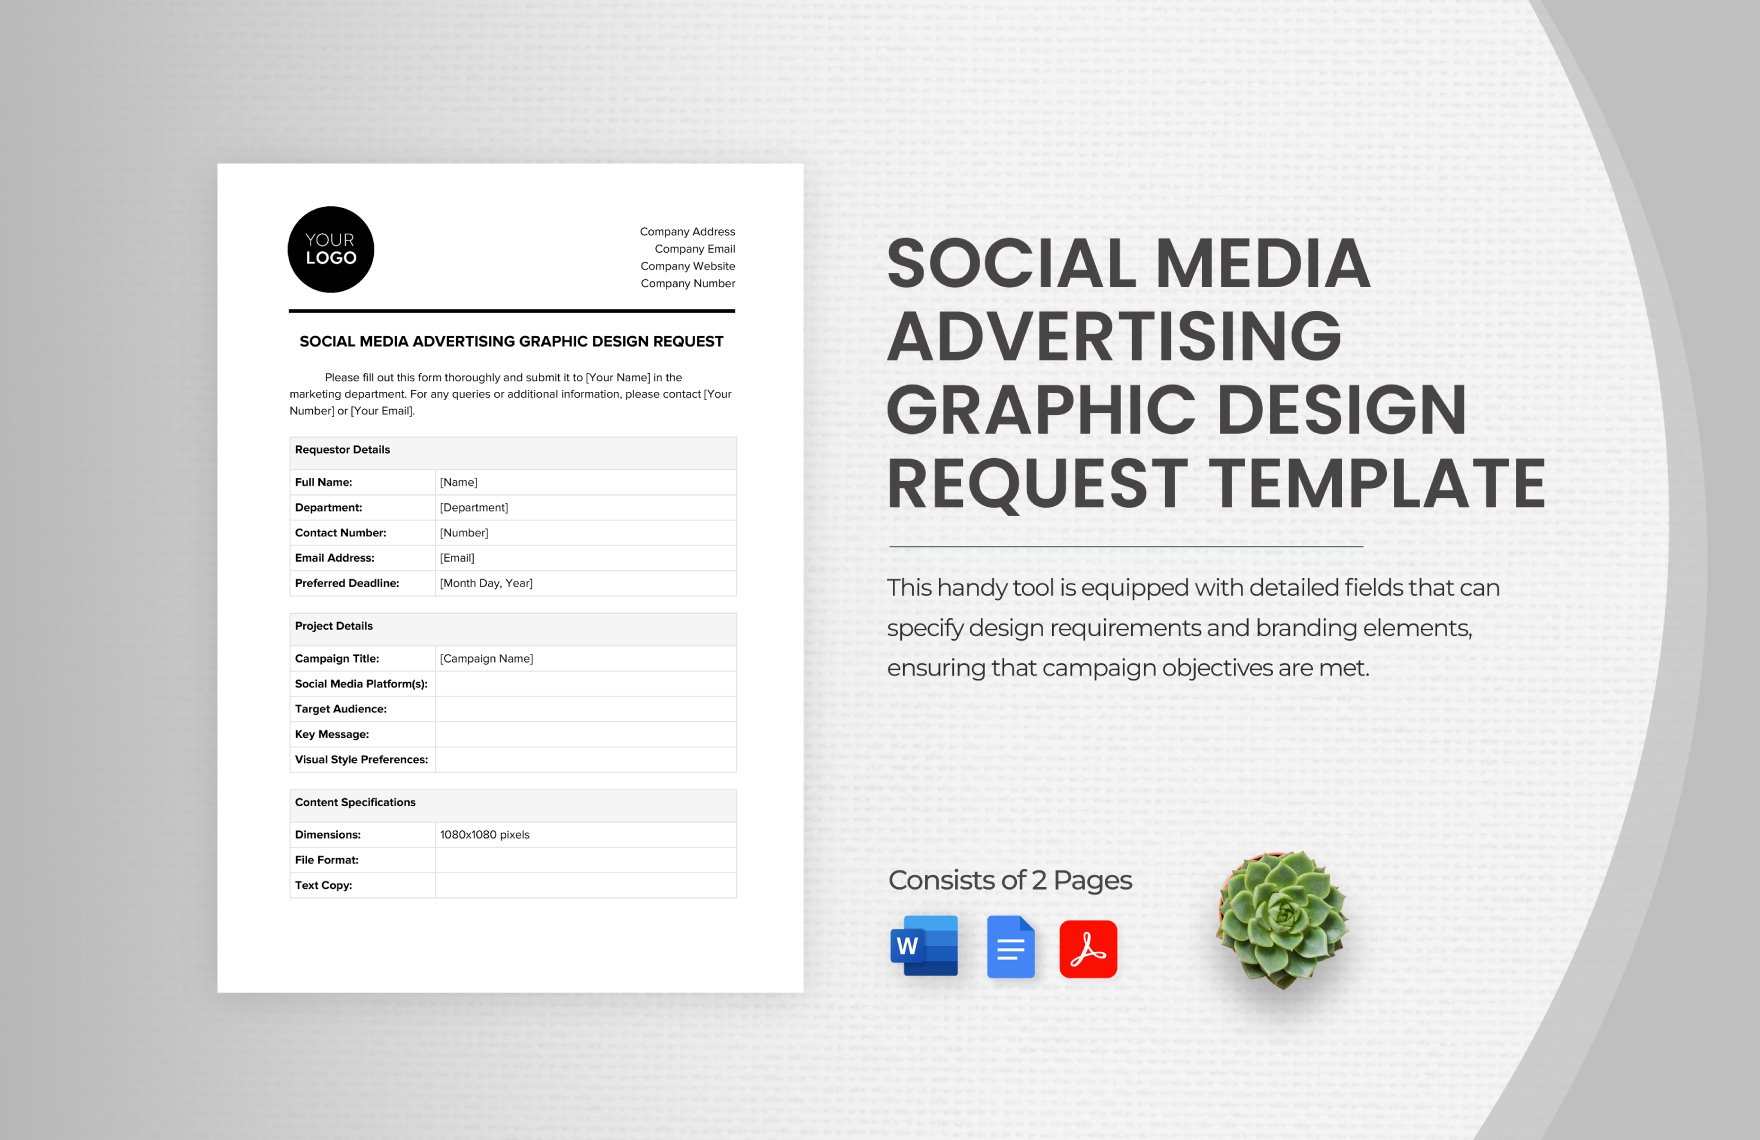 Social Media Advertising Graphic Design Request Template in Word, Google Docs, PDF